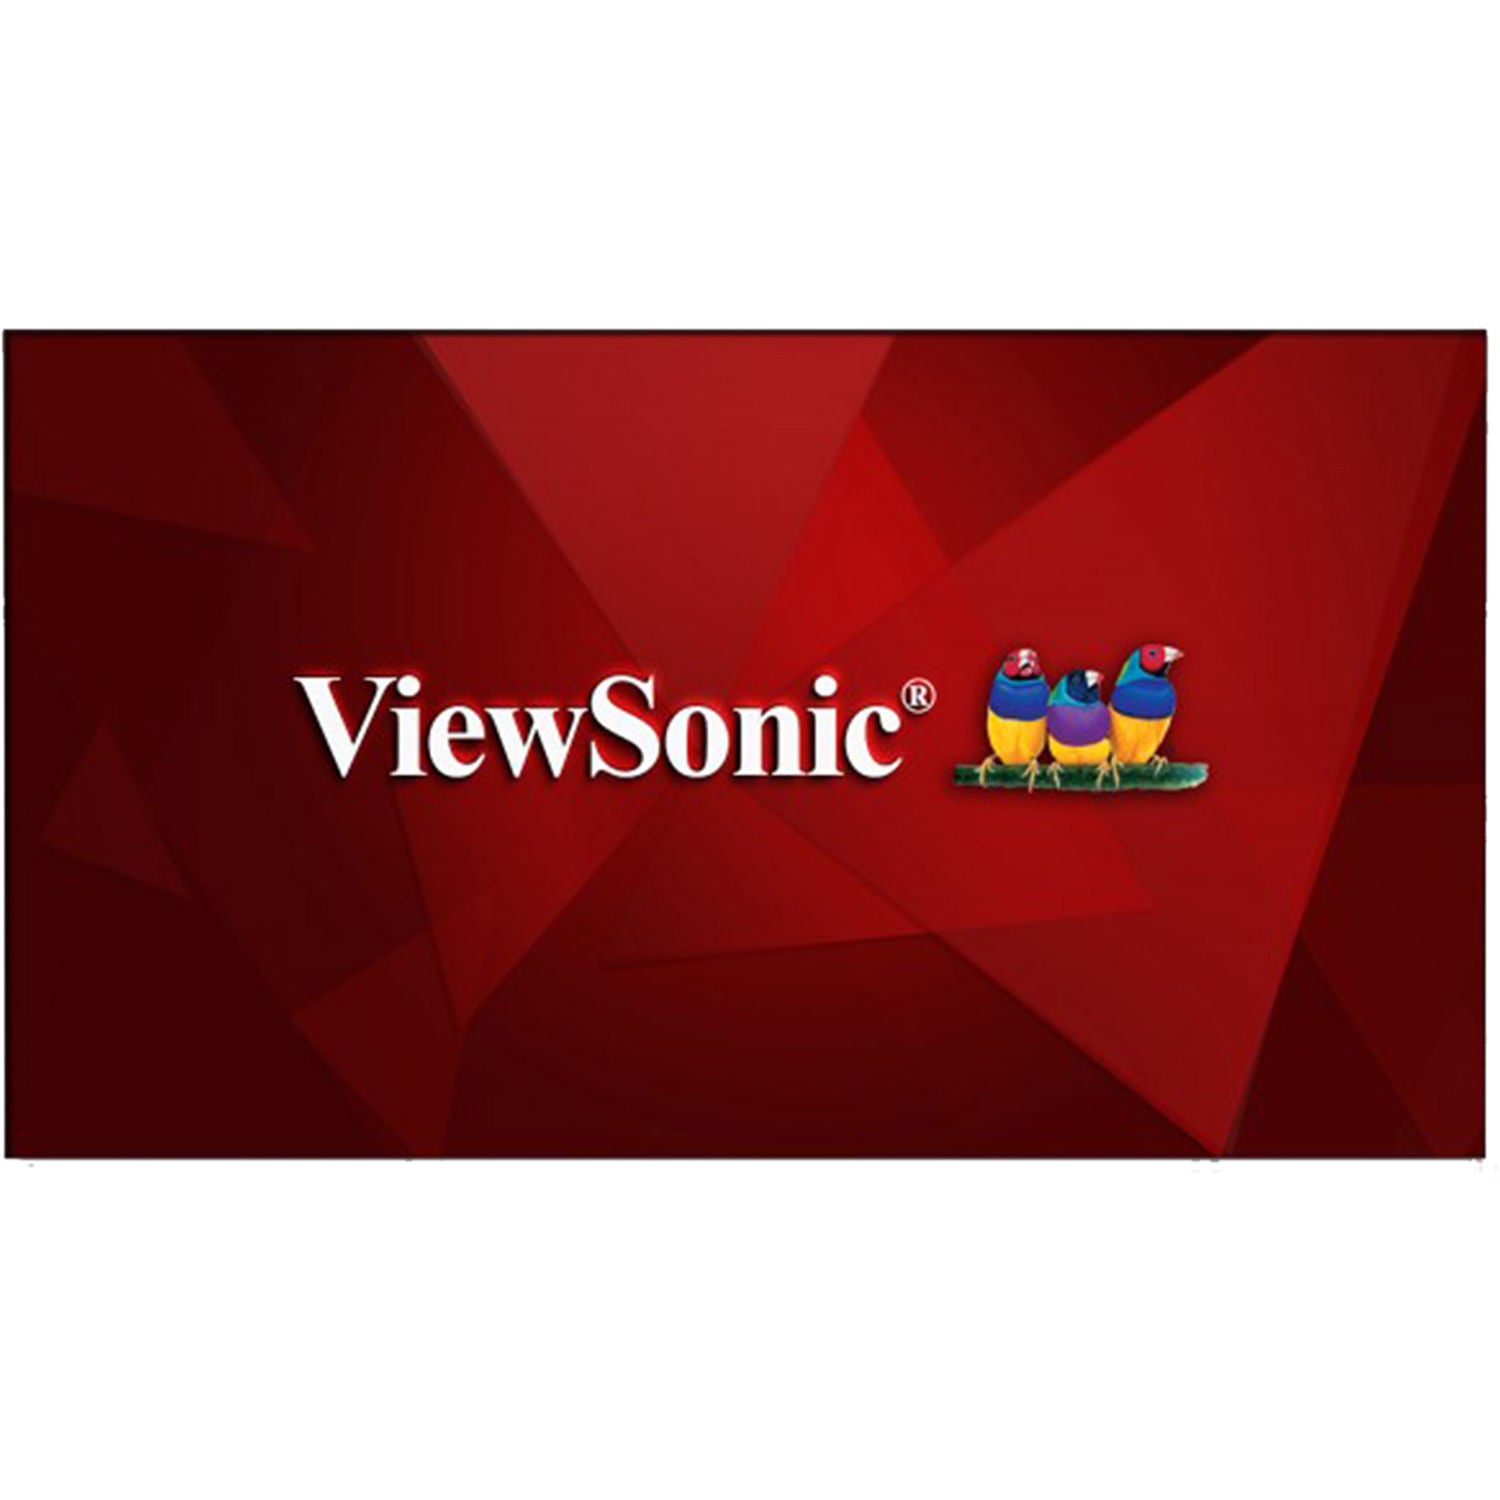 ViewSonic CDX4952-R 49" Ultra-Narrow Bezel Commercial Display - Certified refurbished